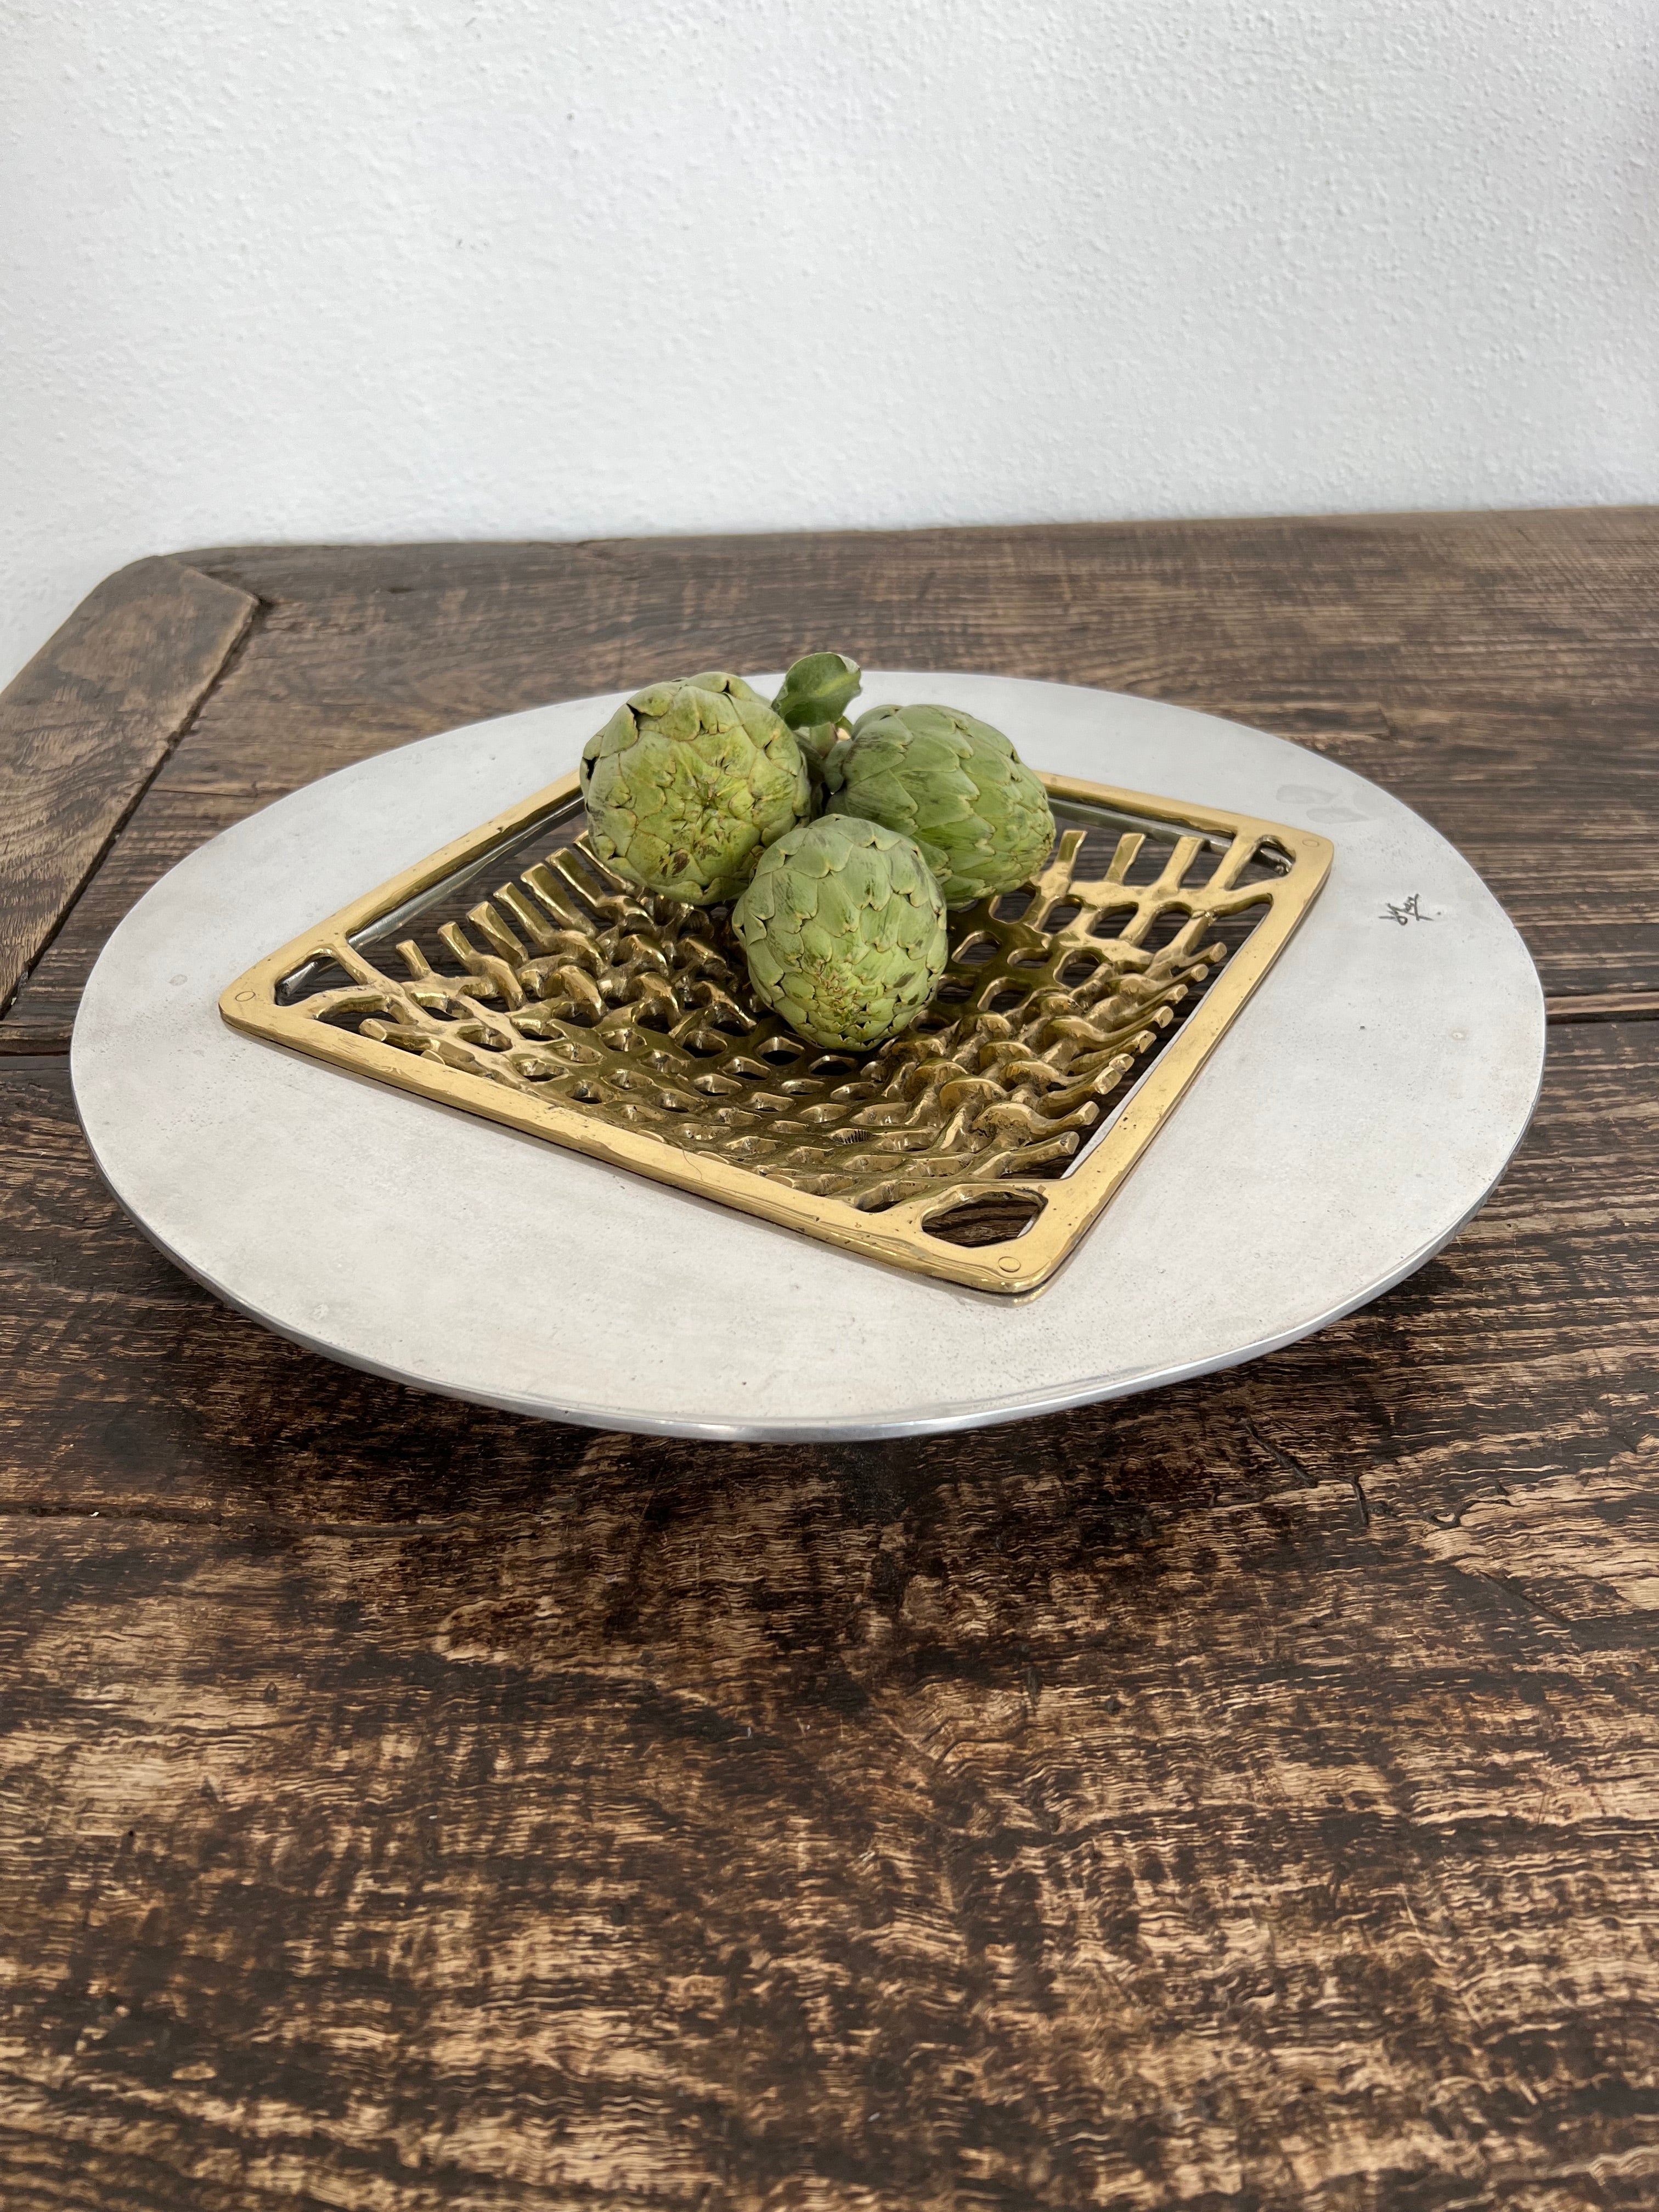 The decorative Mesh Fruit Tray was created by David Marshall, it is made of sand cast aluminum and sand cast brass.
Handmade, mounted and finished in our foundry and workshop in Spain from recycled materials.
Certified authentic by the Artist